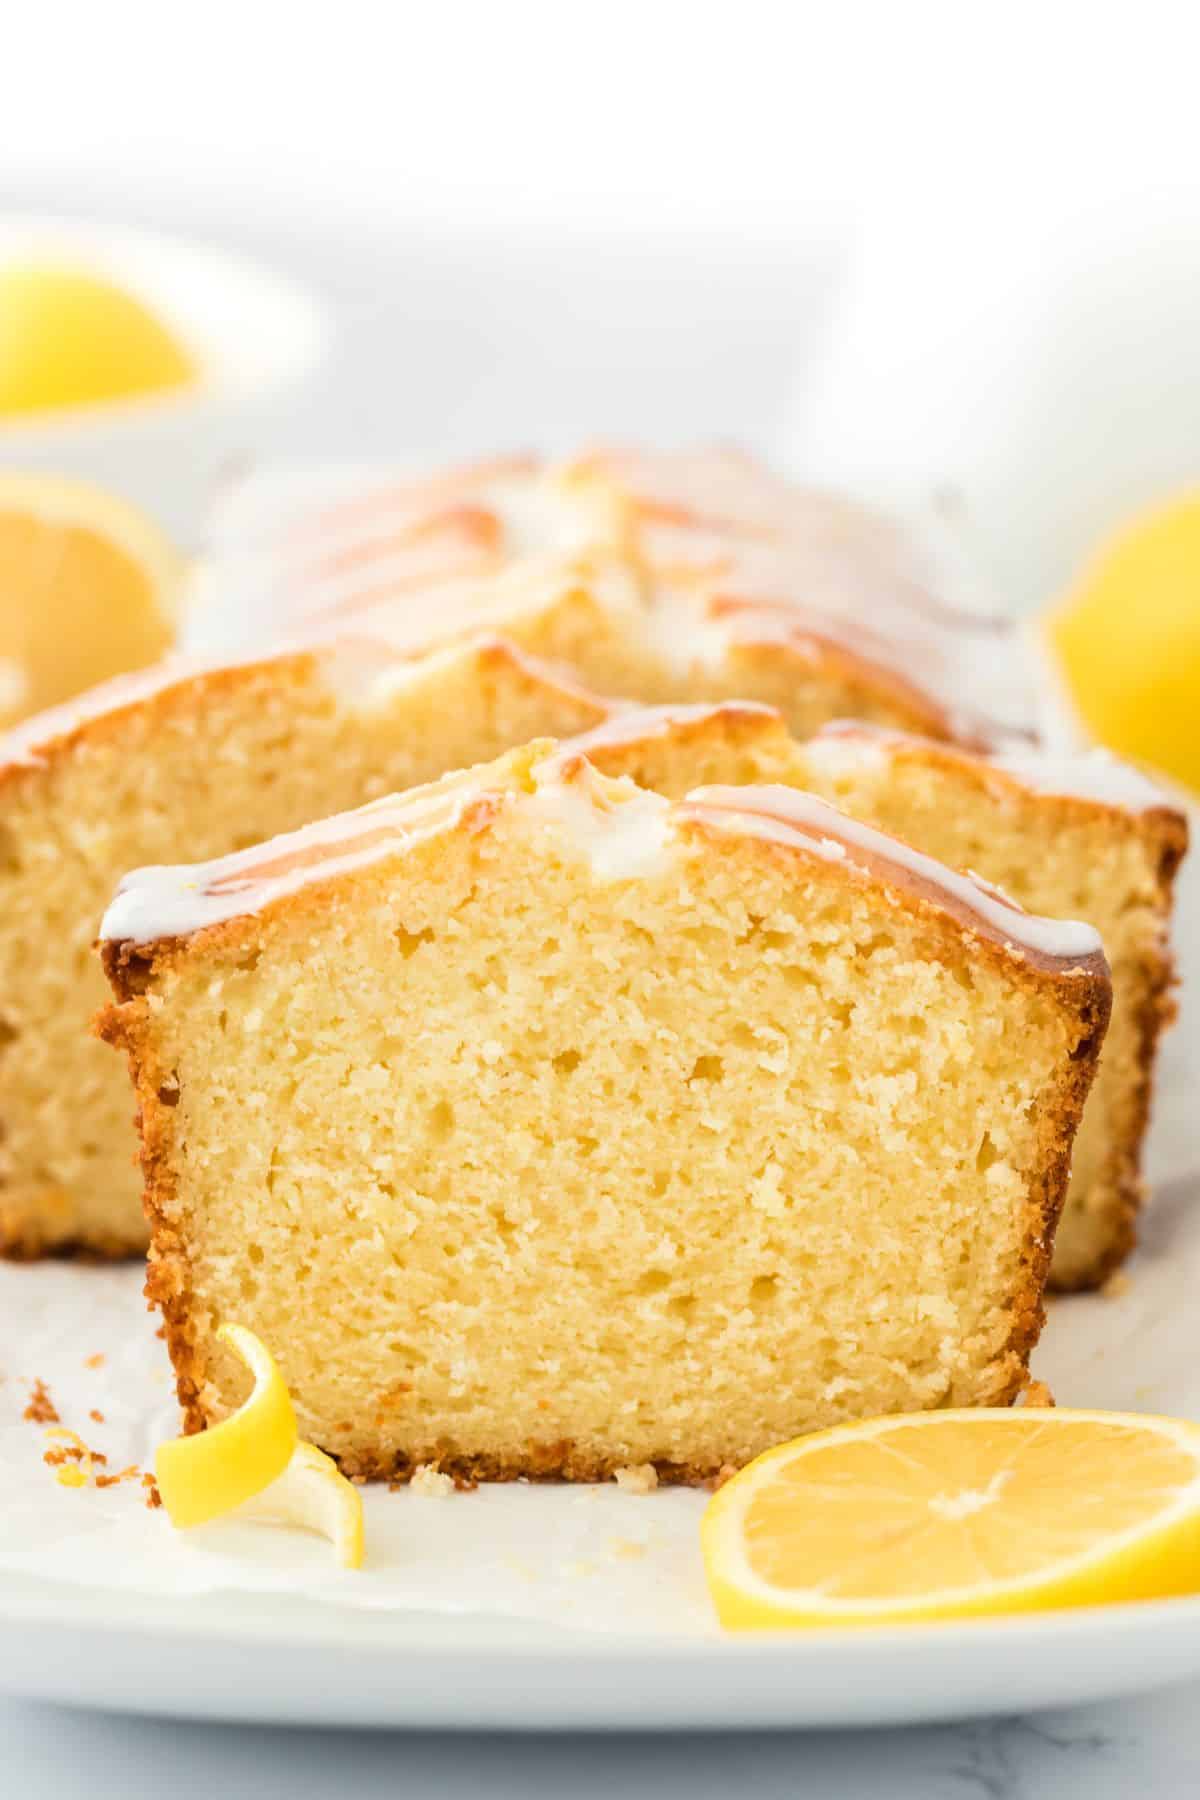 A lemon cake baked in a loaf pan facing the camera with slices cut and staggered but standing up.